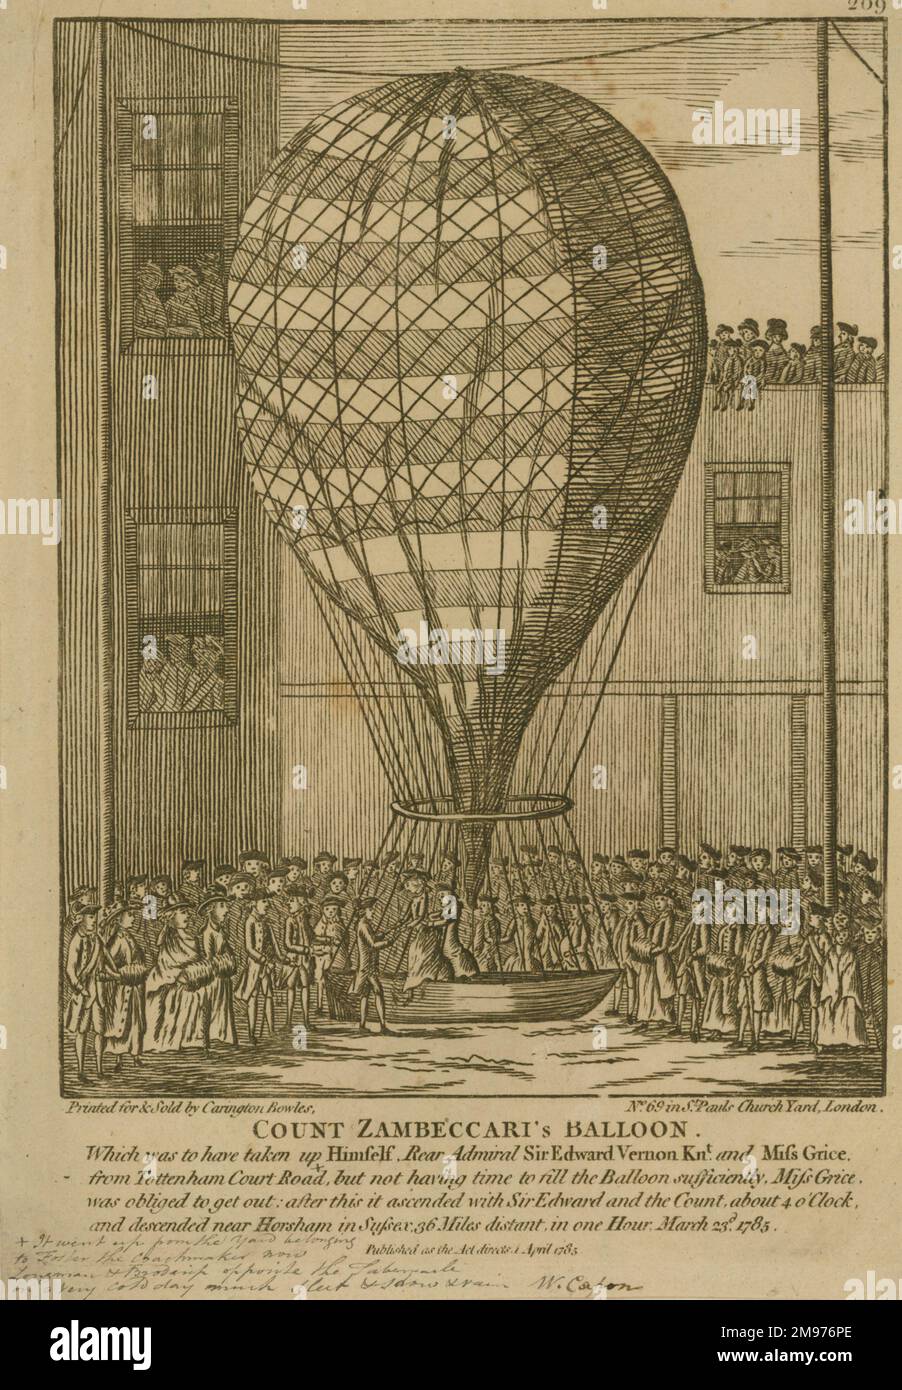 Plate showing “Count Zambeccari’s Balloon. Which was to have taken up himfelf, Rear Admiral Sir Edward Knt. and Mifs Grice from Tottenham Court Road, but not having time to fill the balloon sufficiently, Mifs Grice was obliged to get out: after this it ascended with Sir Edward and the Count, about 4 o’clock, and descended near Horsham in Sufsex: 36 miles distant, in one hour. March 23 1785.” Stock Photo